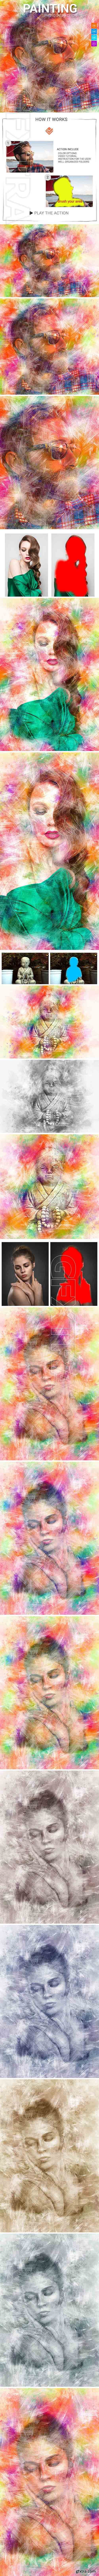 GraphicRiver - Painting Photoshop Action 21194079